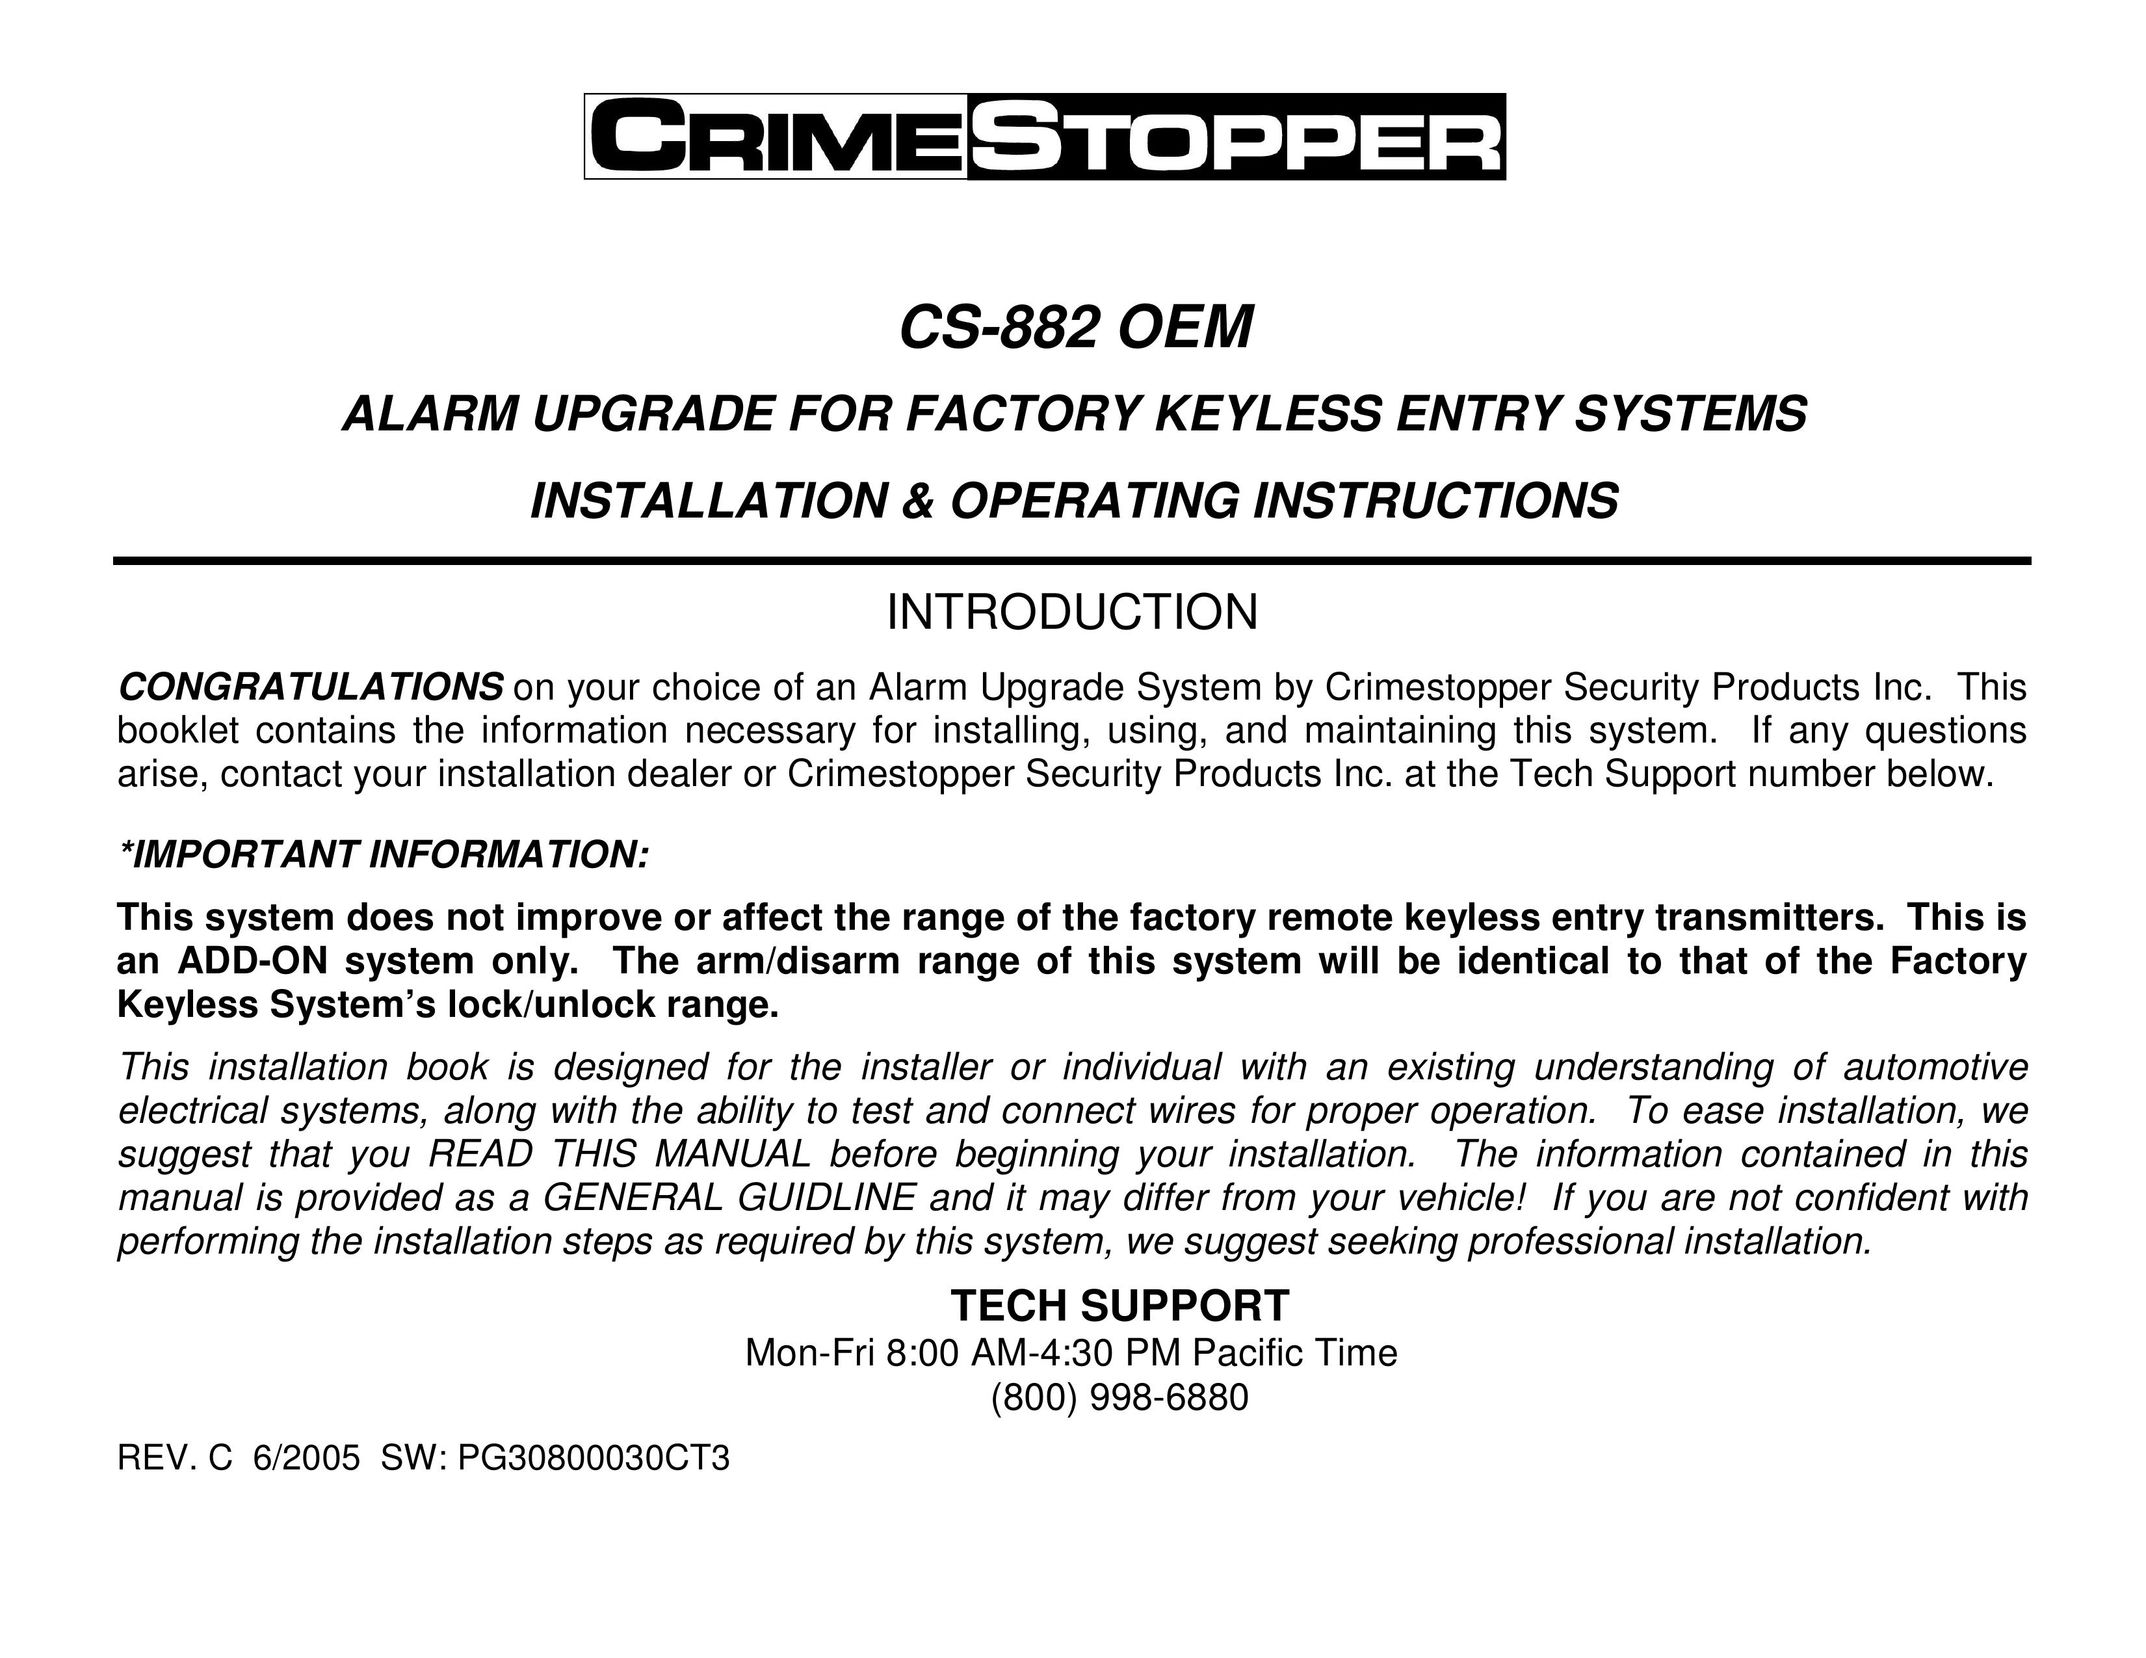 Crimestopper Security Products CS-882 OEM Home Security System User Manual